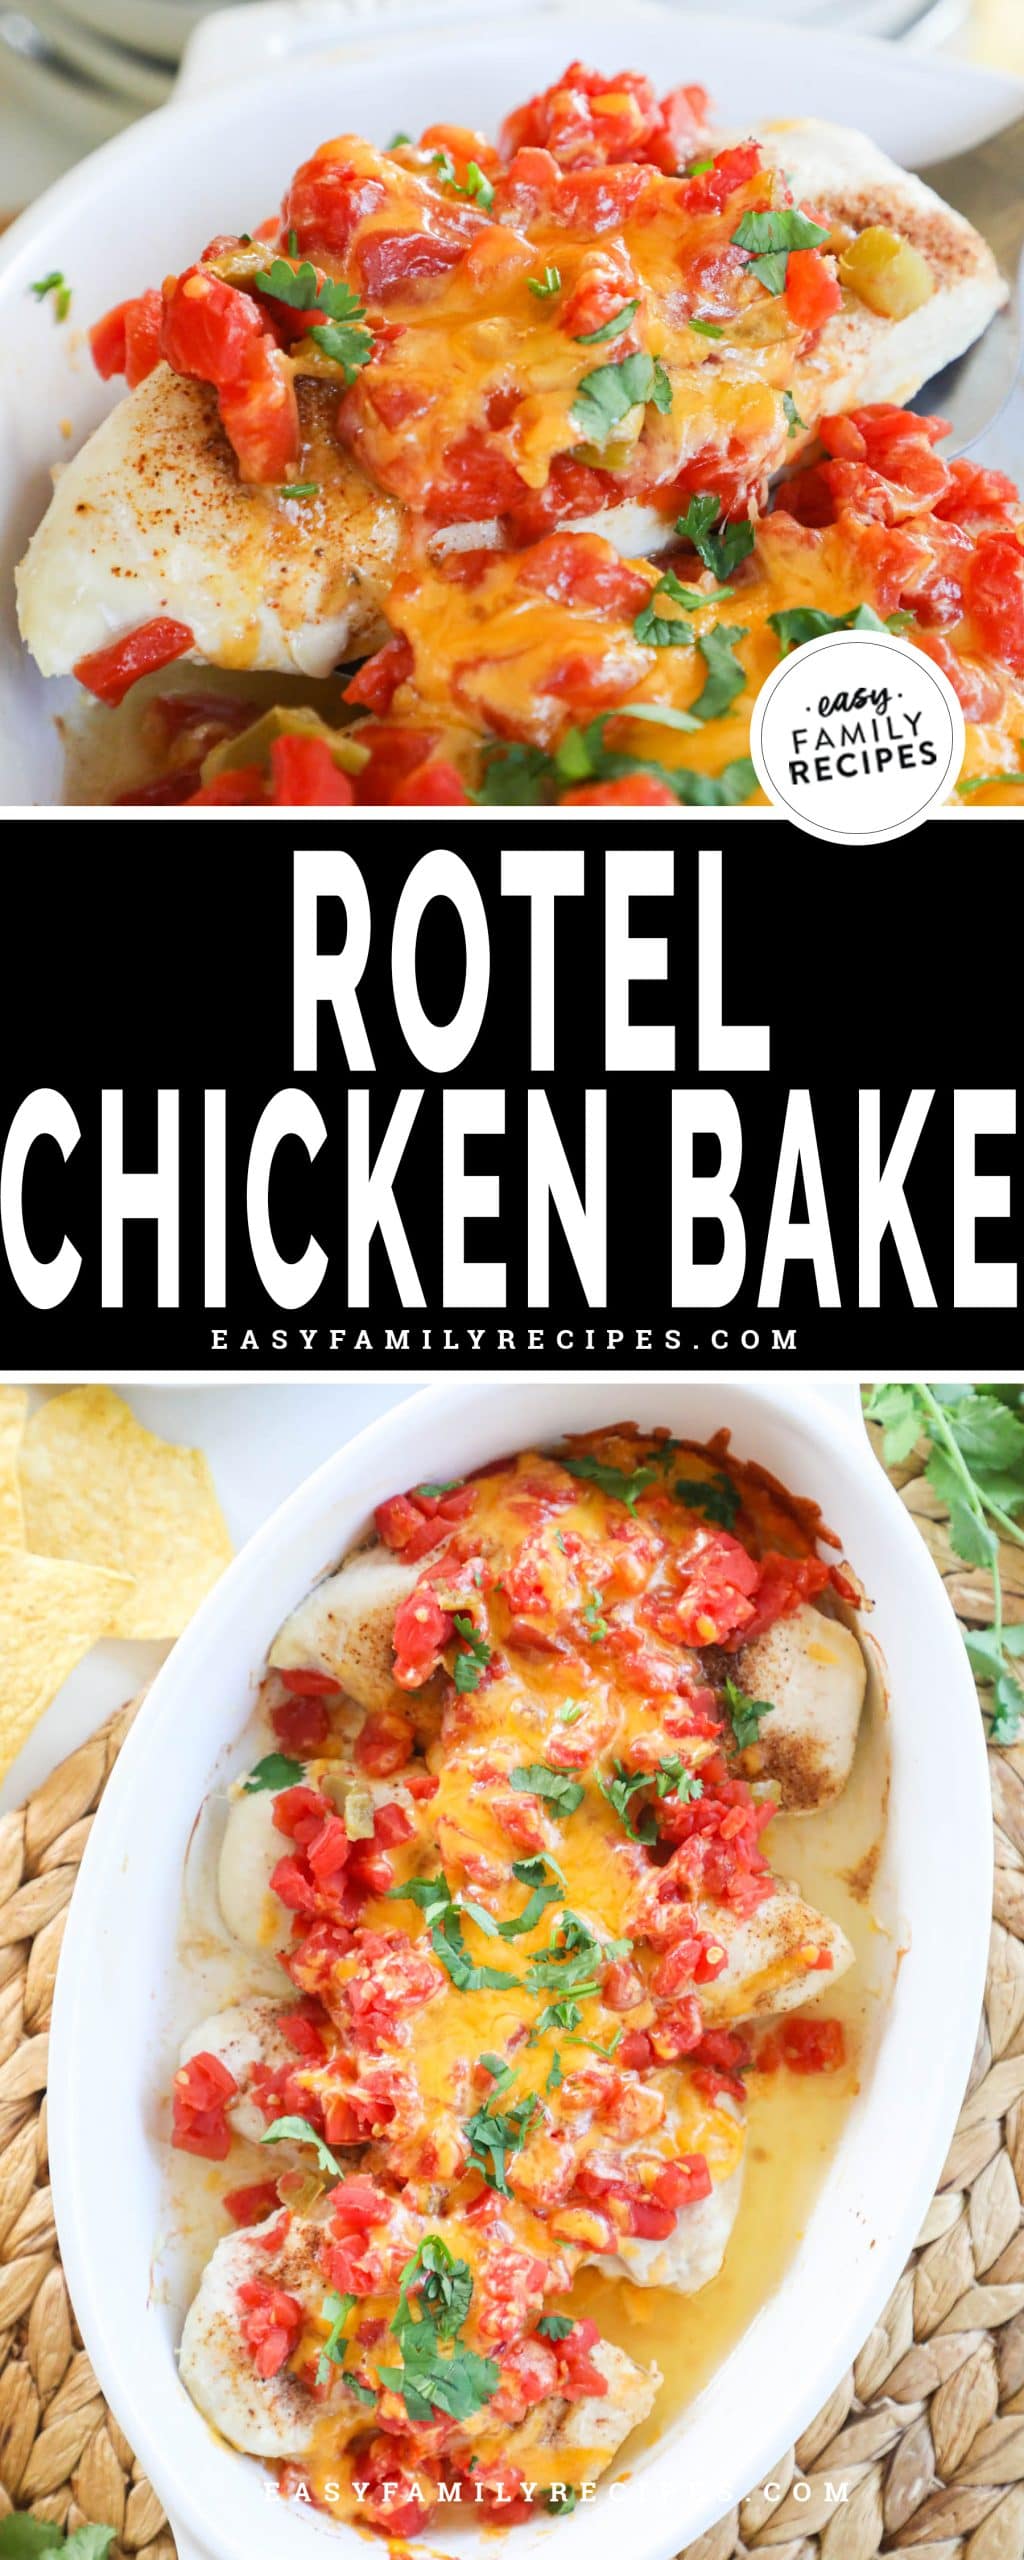 Rotel chicken bake with tomatoes, cheese and fresh cilantro 